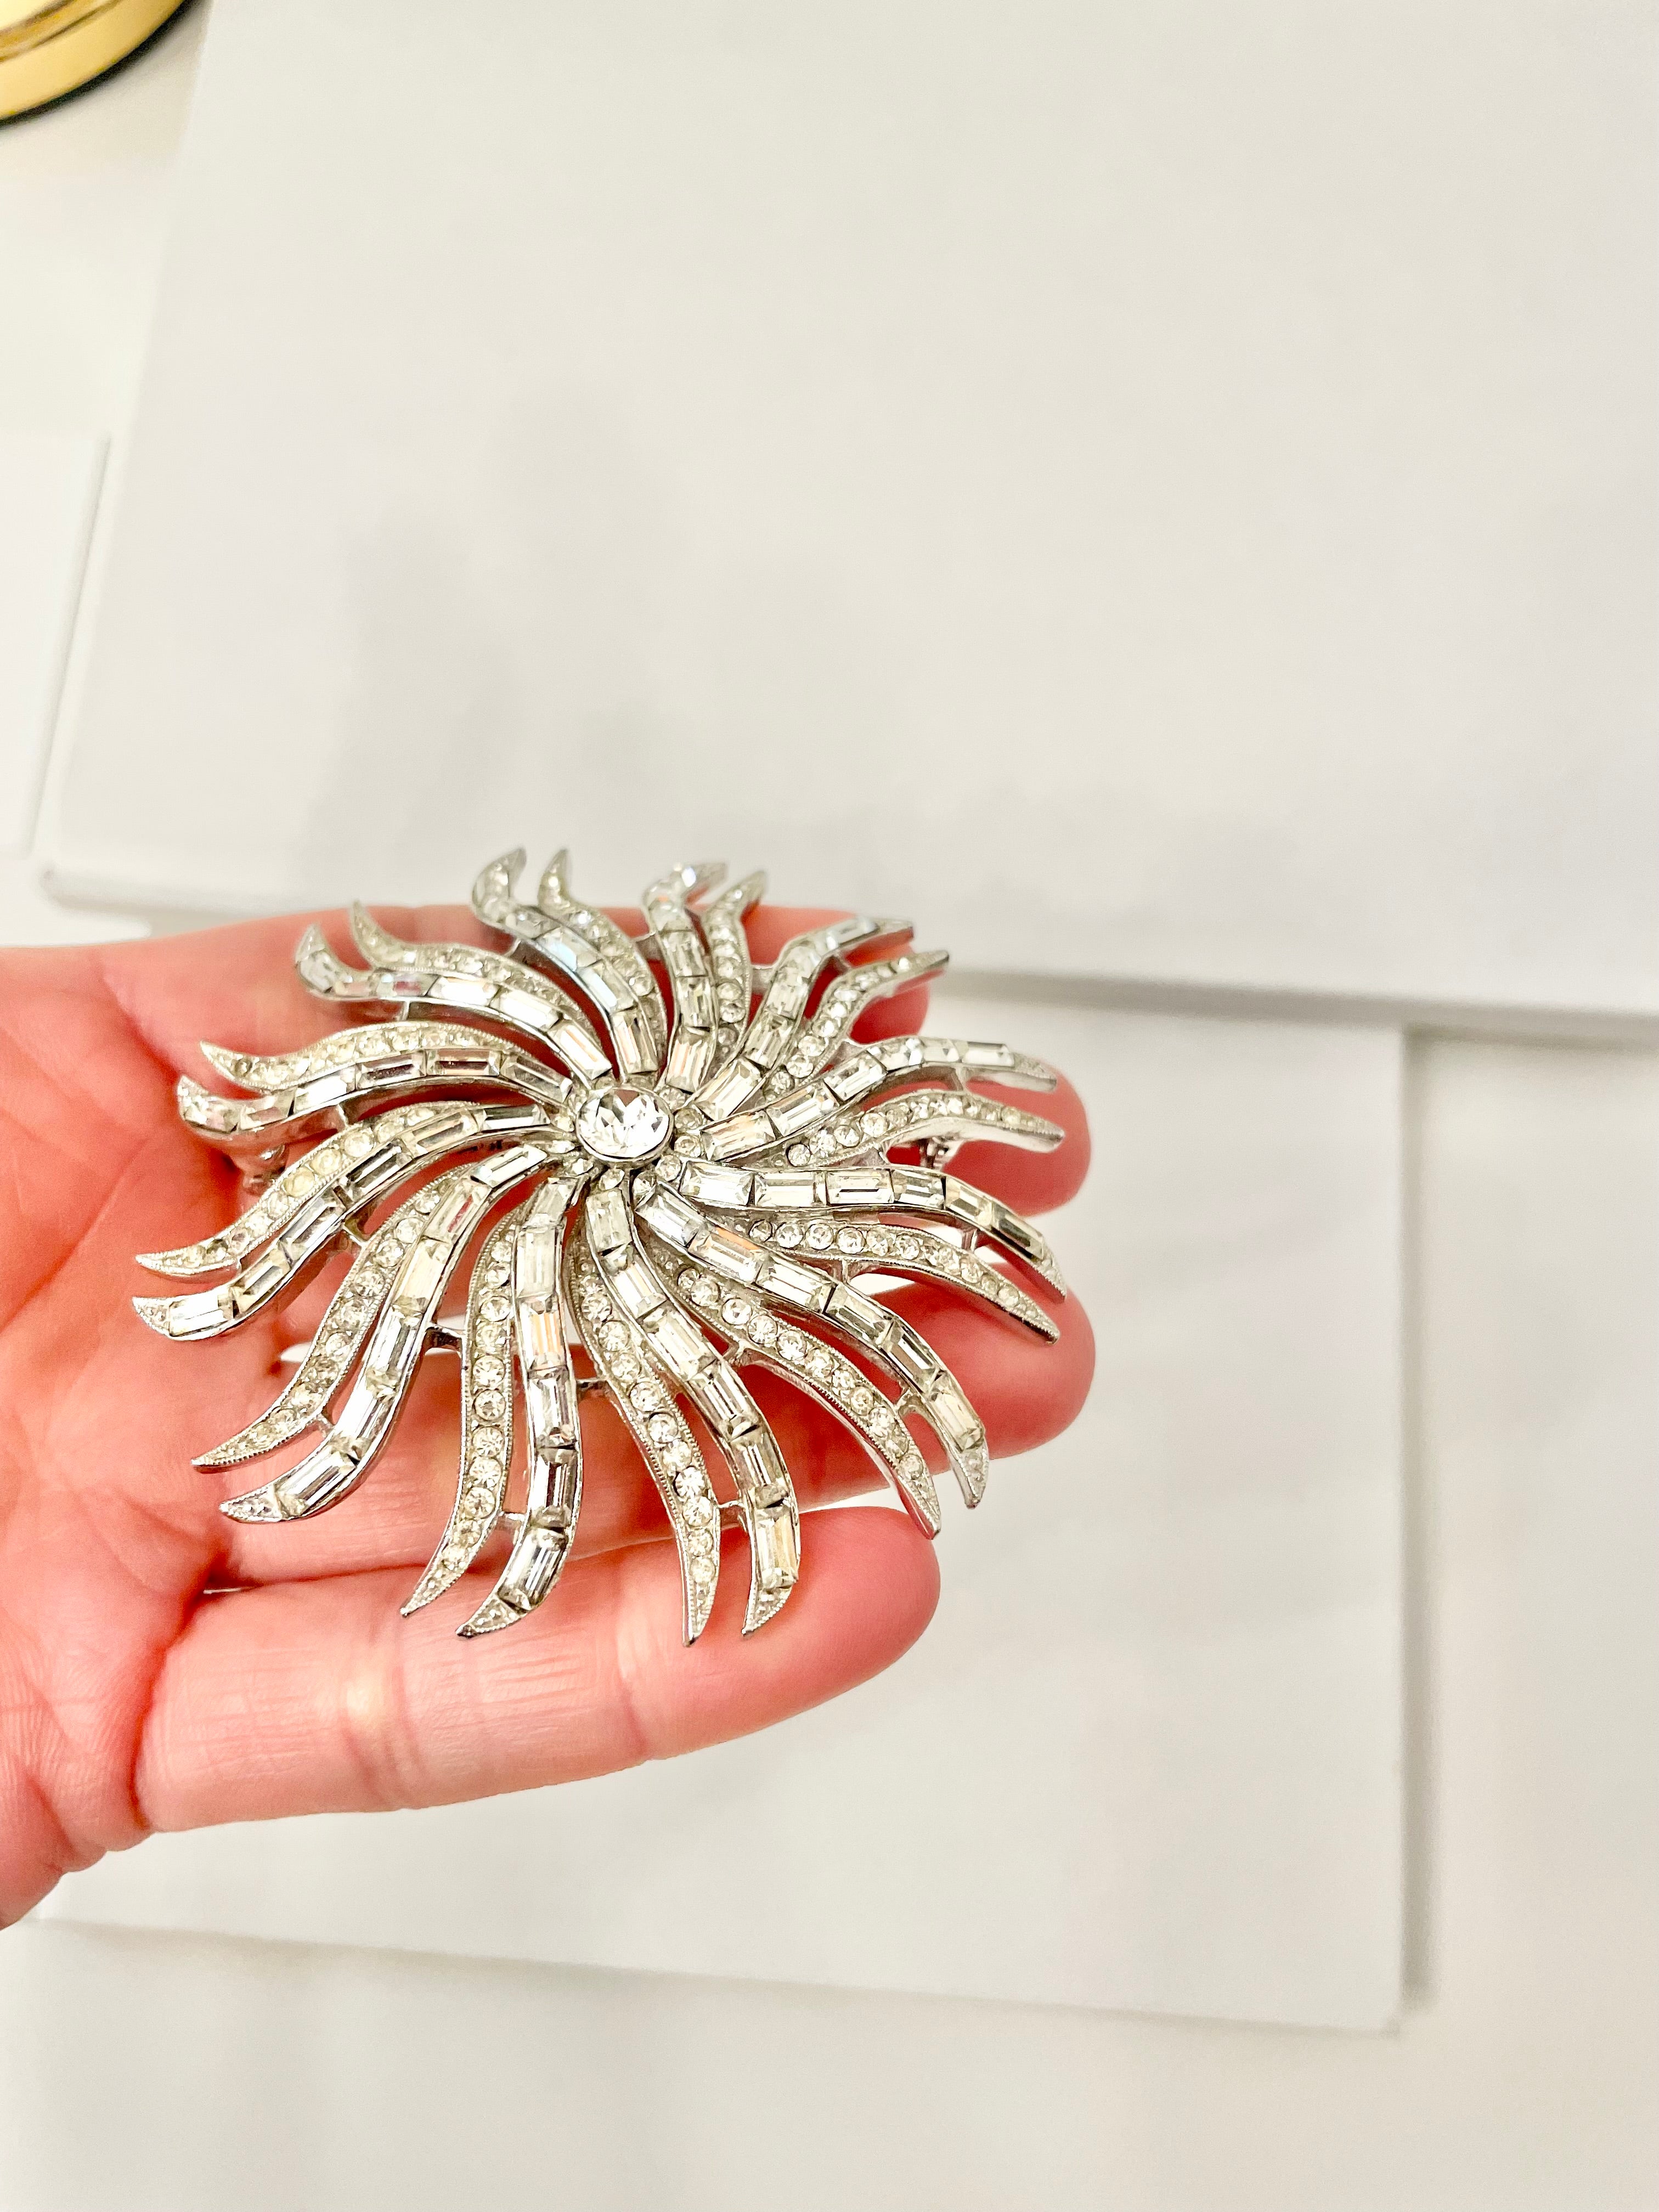 The 1960's Heiress and her diamond collection.. Oh my..this glass starburst brooch is so divine!!